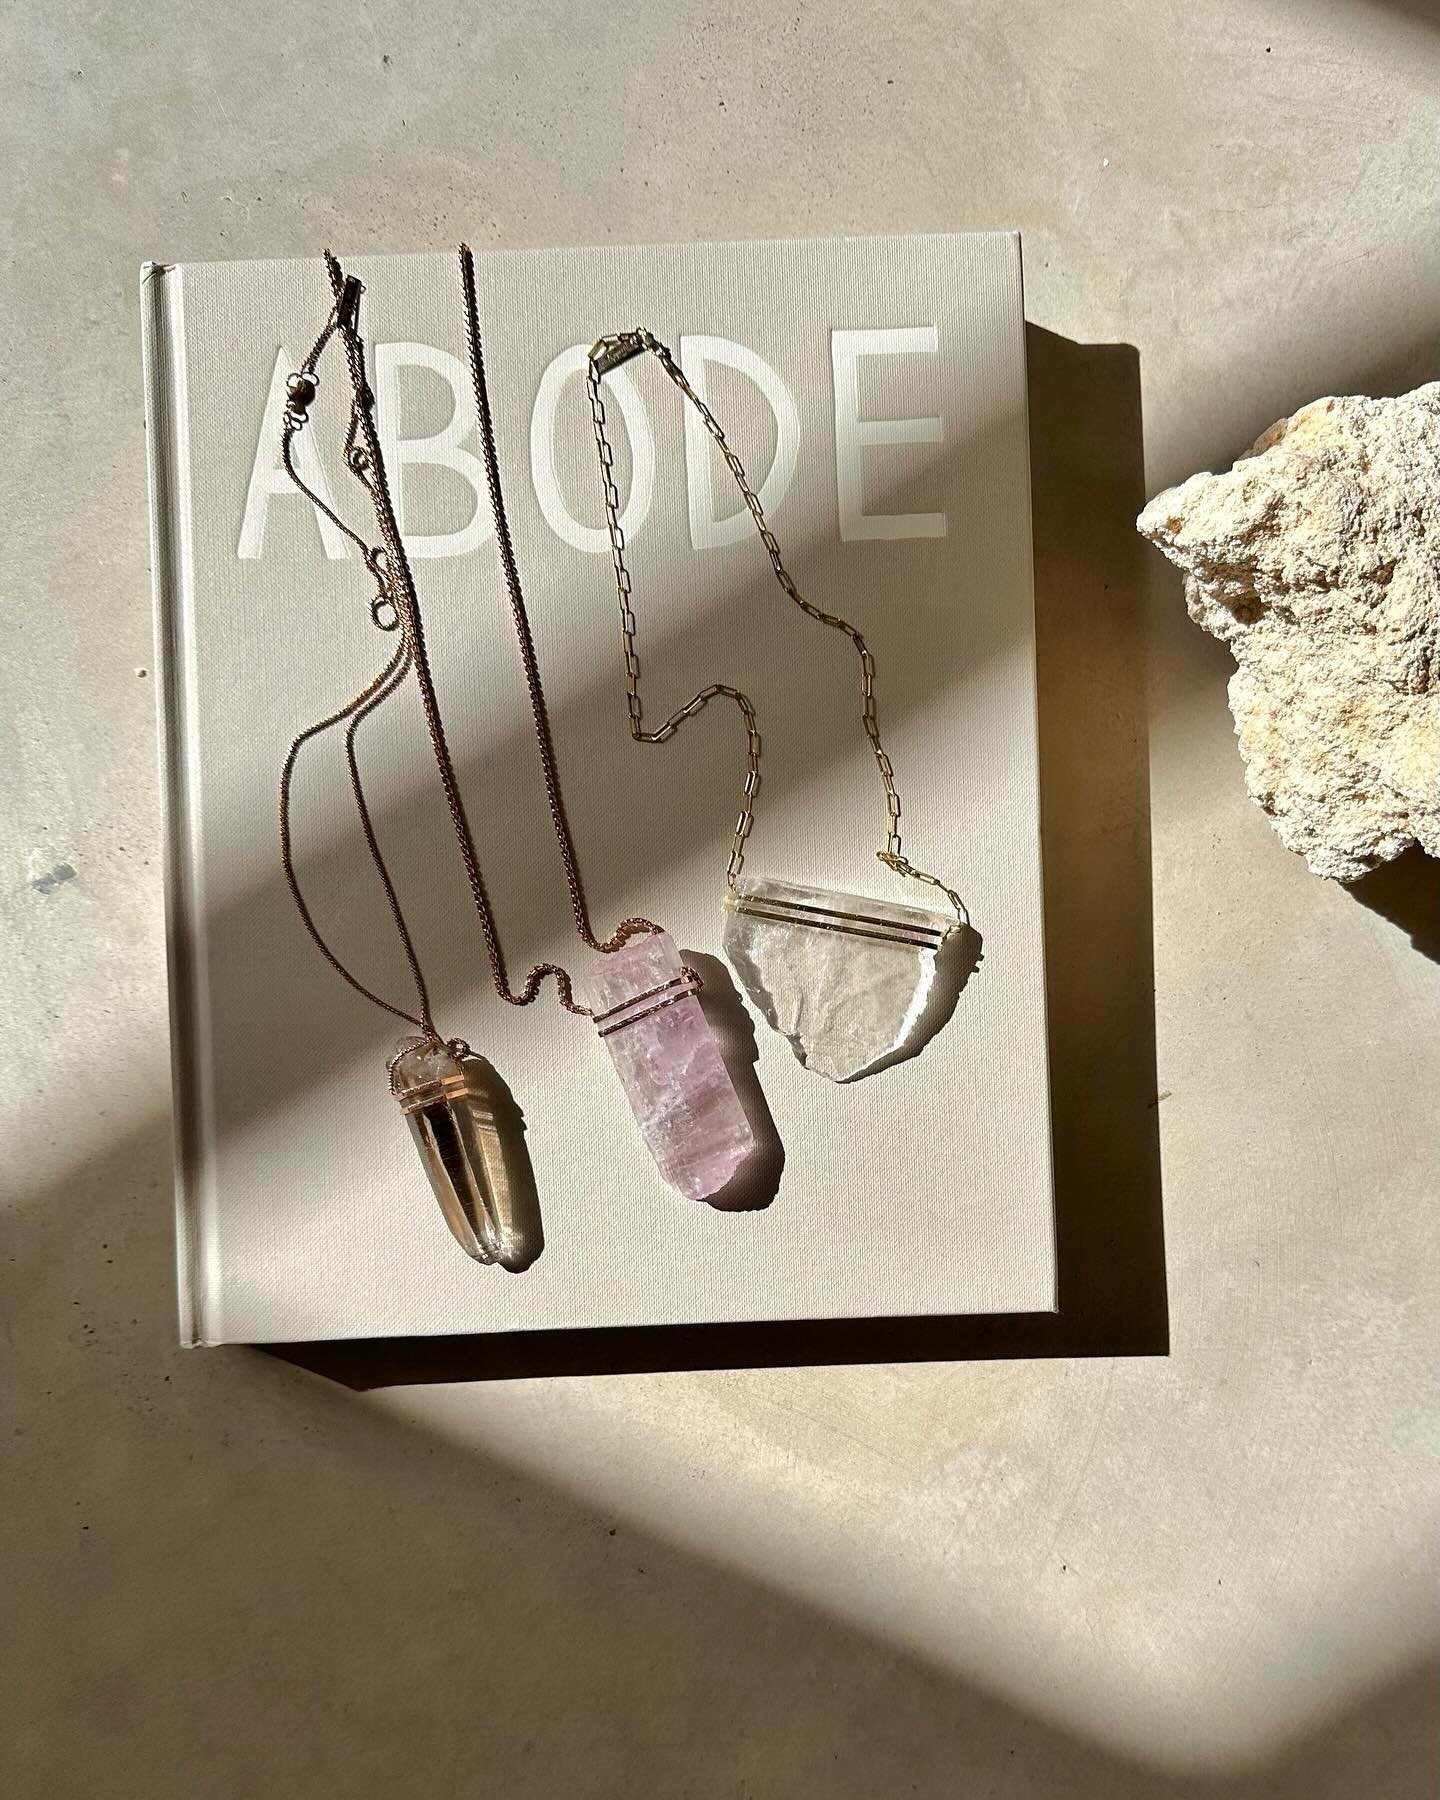 Casa Stone is preparing for Mother&rsquo;s Day! ✨ And we have a special gift ready just for you.

Until May 12th every purchase will include a Clear Quartz Mediation point, the master healer of all stones. 🙏🏻

Clear Quartz is the wisest crystal, ca